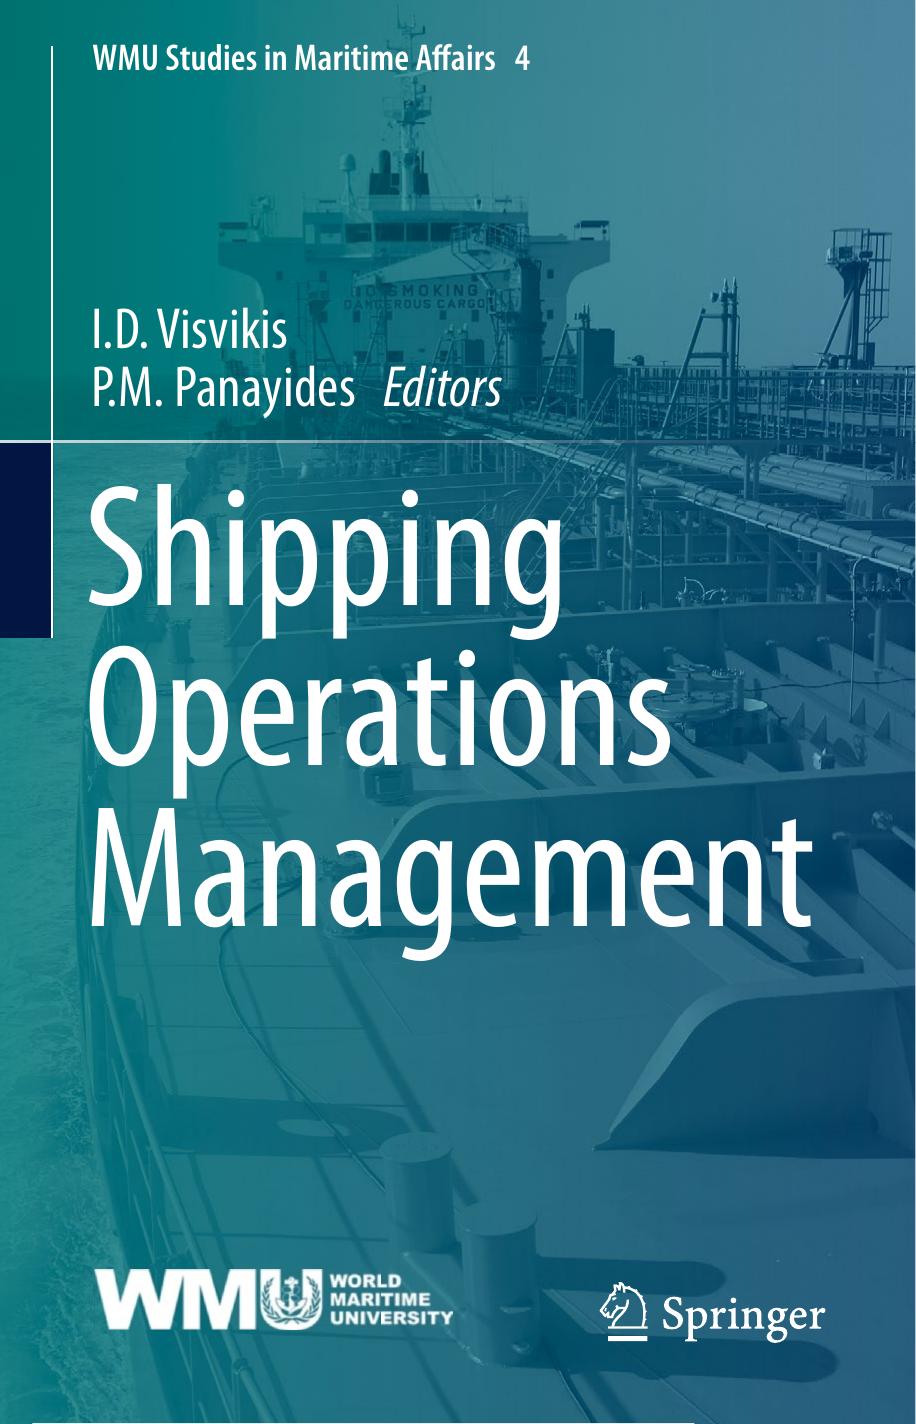 Shipping Operations Management ( PDFDrive ) 2017